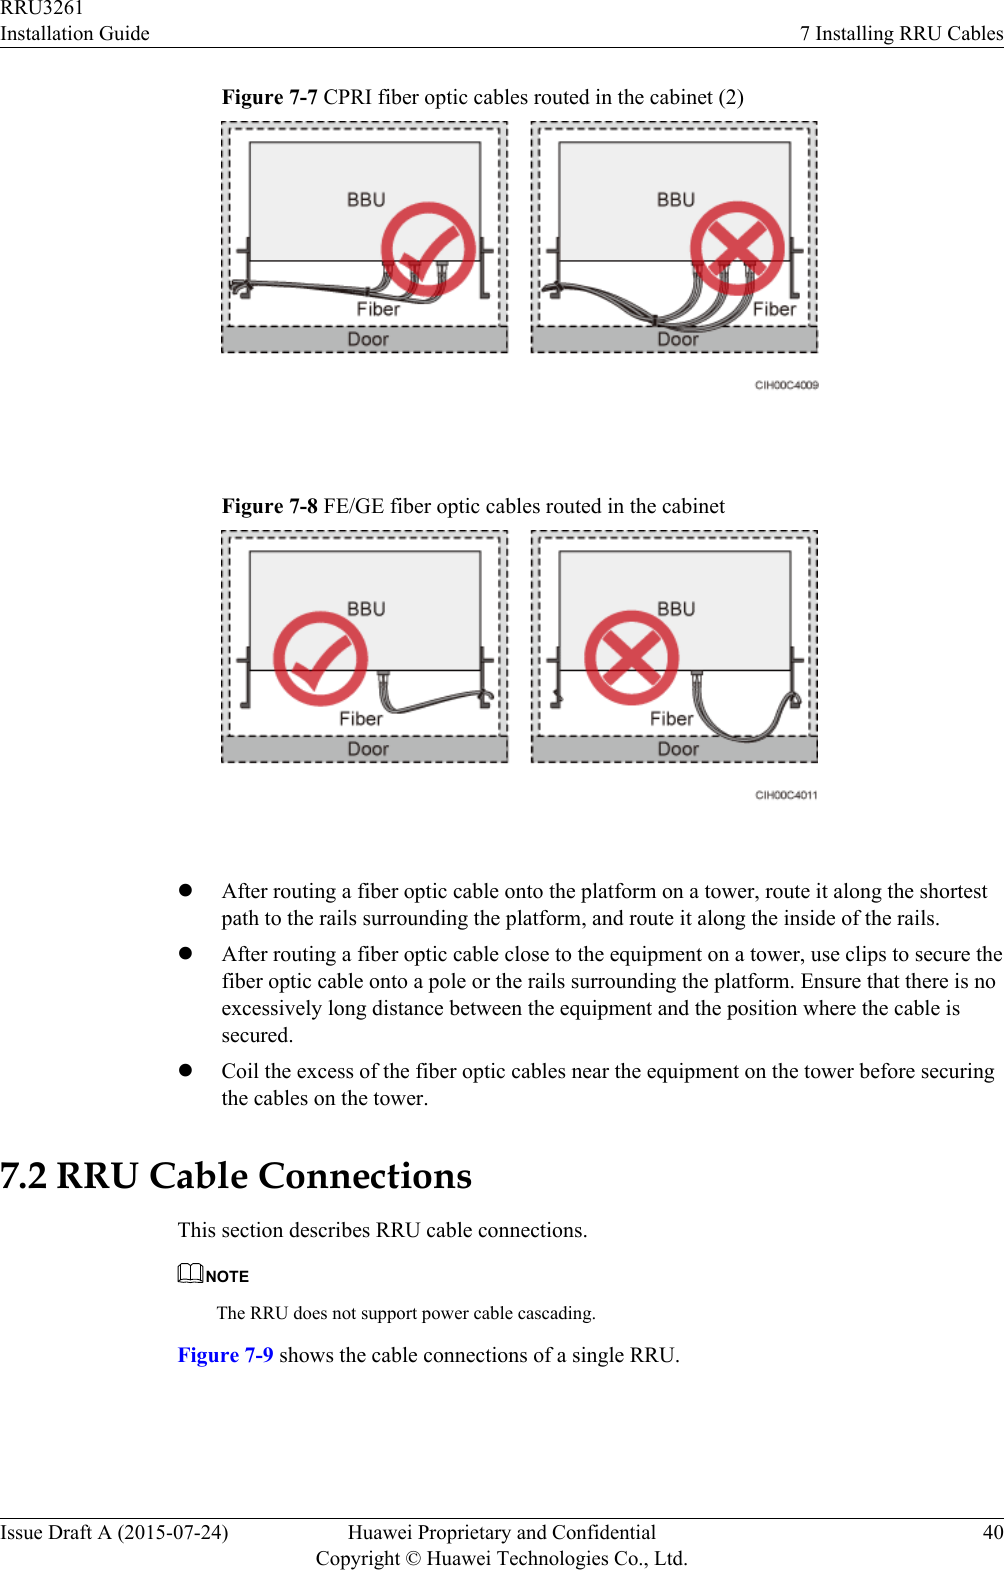 Figure 7-7 CPRI fiber optic cables routed in the cabinet (2) Figure 7-8 FE/GE fiber optic cables routed in the cabinet lAfter routing a fiber optic cable onto the platform on a tower, route it along the shortestpath to the rails surrounding the platform, and route it along the inside of the rails.lAfter routing a fiber optic cable close to the equipment on a tower, use clips to secure thefiber optic cable onto a pole or the rails surrounding the platform. Ensure that there is noexcessively long distance between the equipment and the position where the cable issecured.lCoil the excess of the fiber optic cables near the equipment on the tower before securingthe cables on the tower.7.2 RRU Cable ConnectionsThis section describes RRU cable connections.NOTEThe RRU does not support power cable cascading.Figure 7-9 shows the cable connections of a single RRU.RRU3261Installation Guide 7 Installing RRU CablesIssue Draft A (2015-07-24) Huawei Proprietary and ConfidentialCopyright © Huawei Technologies Co., Ltd.40